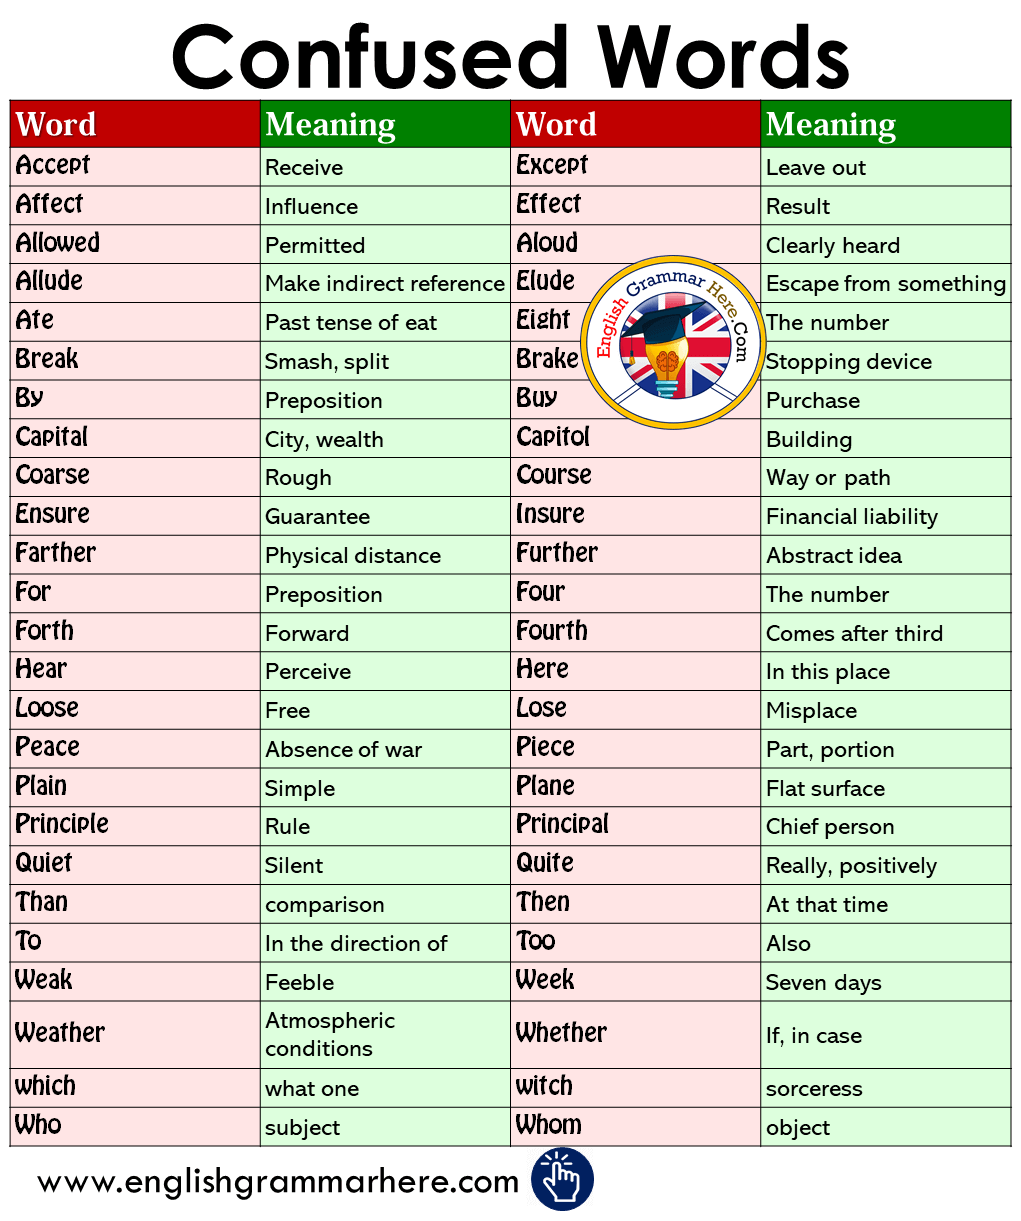 Commonly Confused Words in English